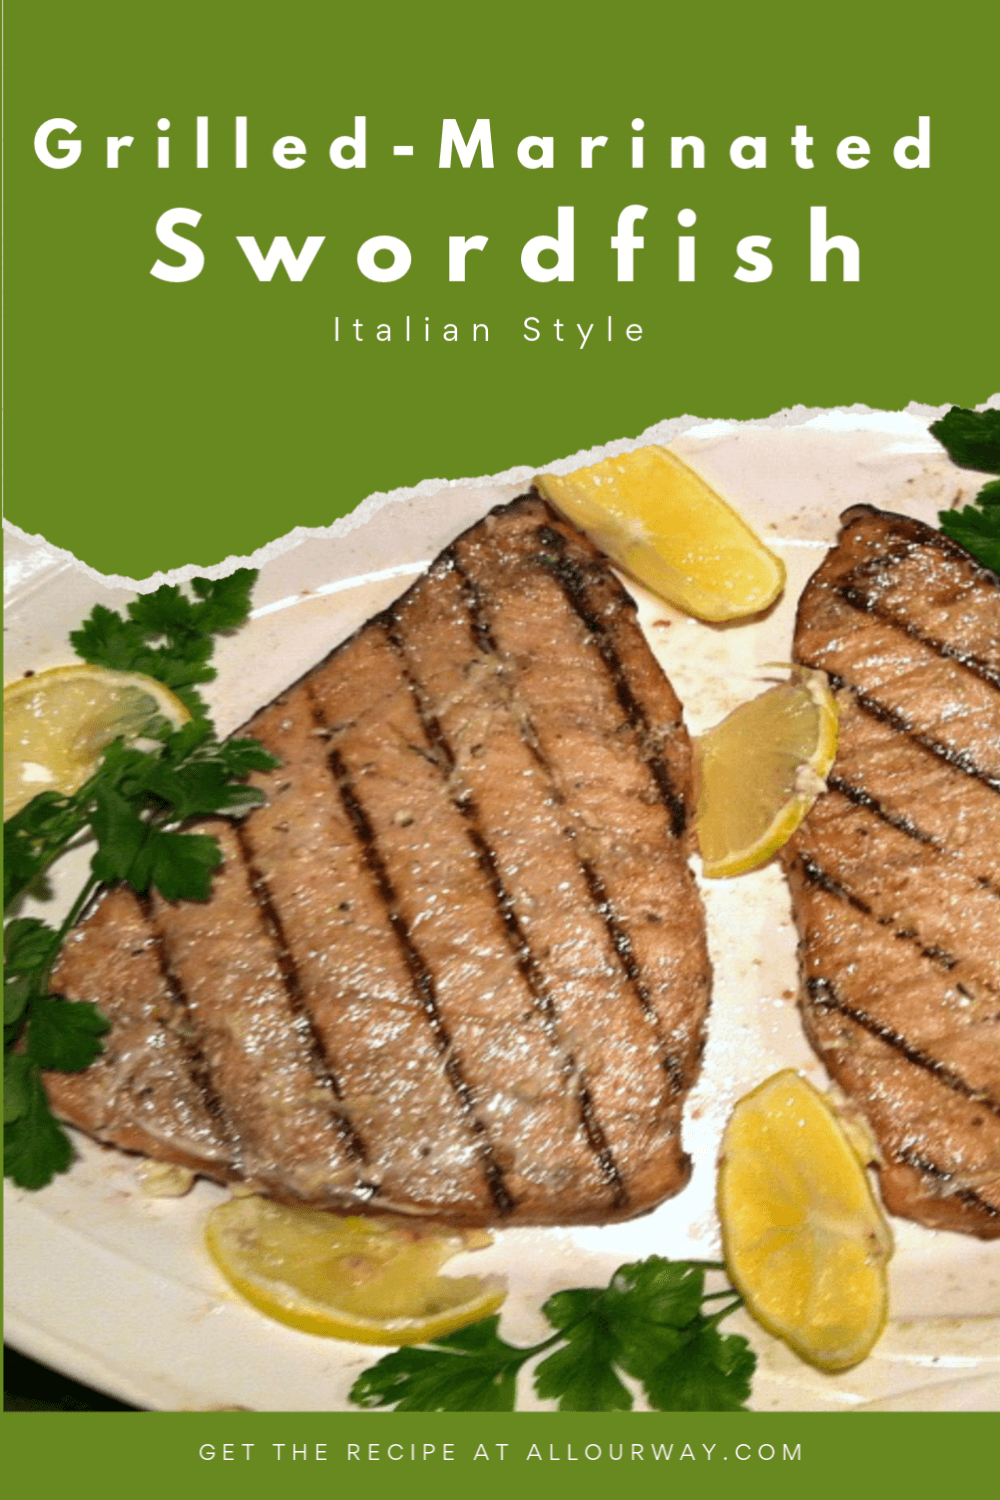 A very good way to prepare swordfish. The fish turns out full of flavor and it is very moist. The marinade is a combination of fresh herbs, balsamic vinegar, fresh lemon juice, garlic and olive oil. A quick meal to prepare and excellent for weeknight, company, and the Lenten season.